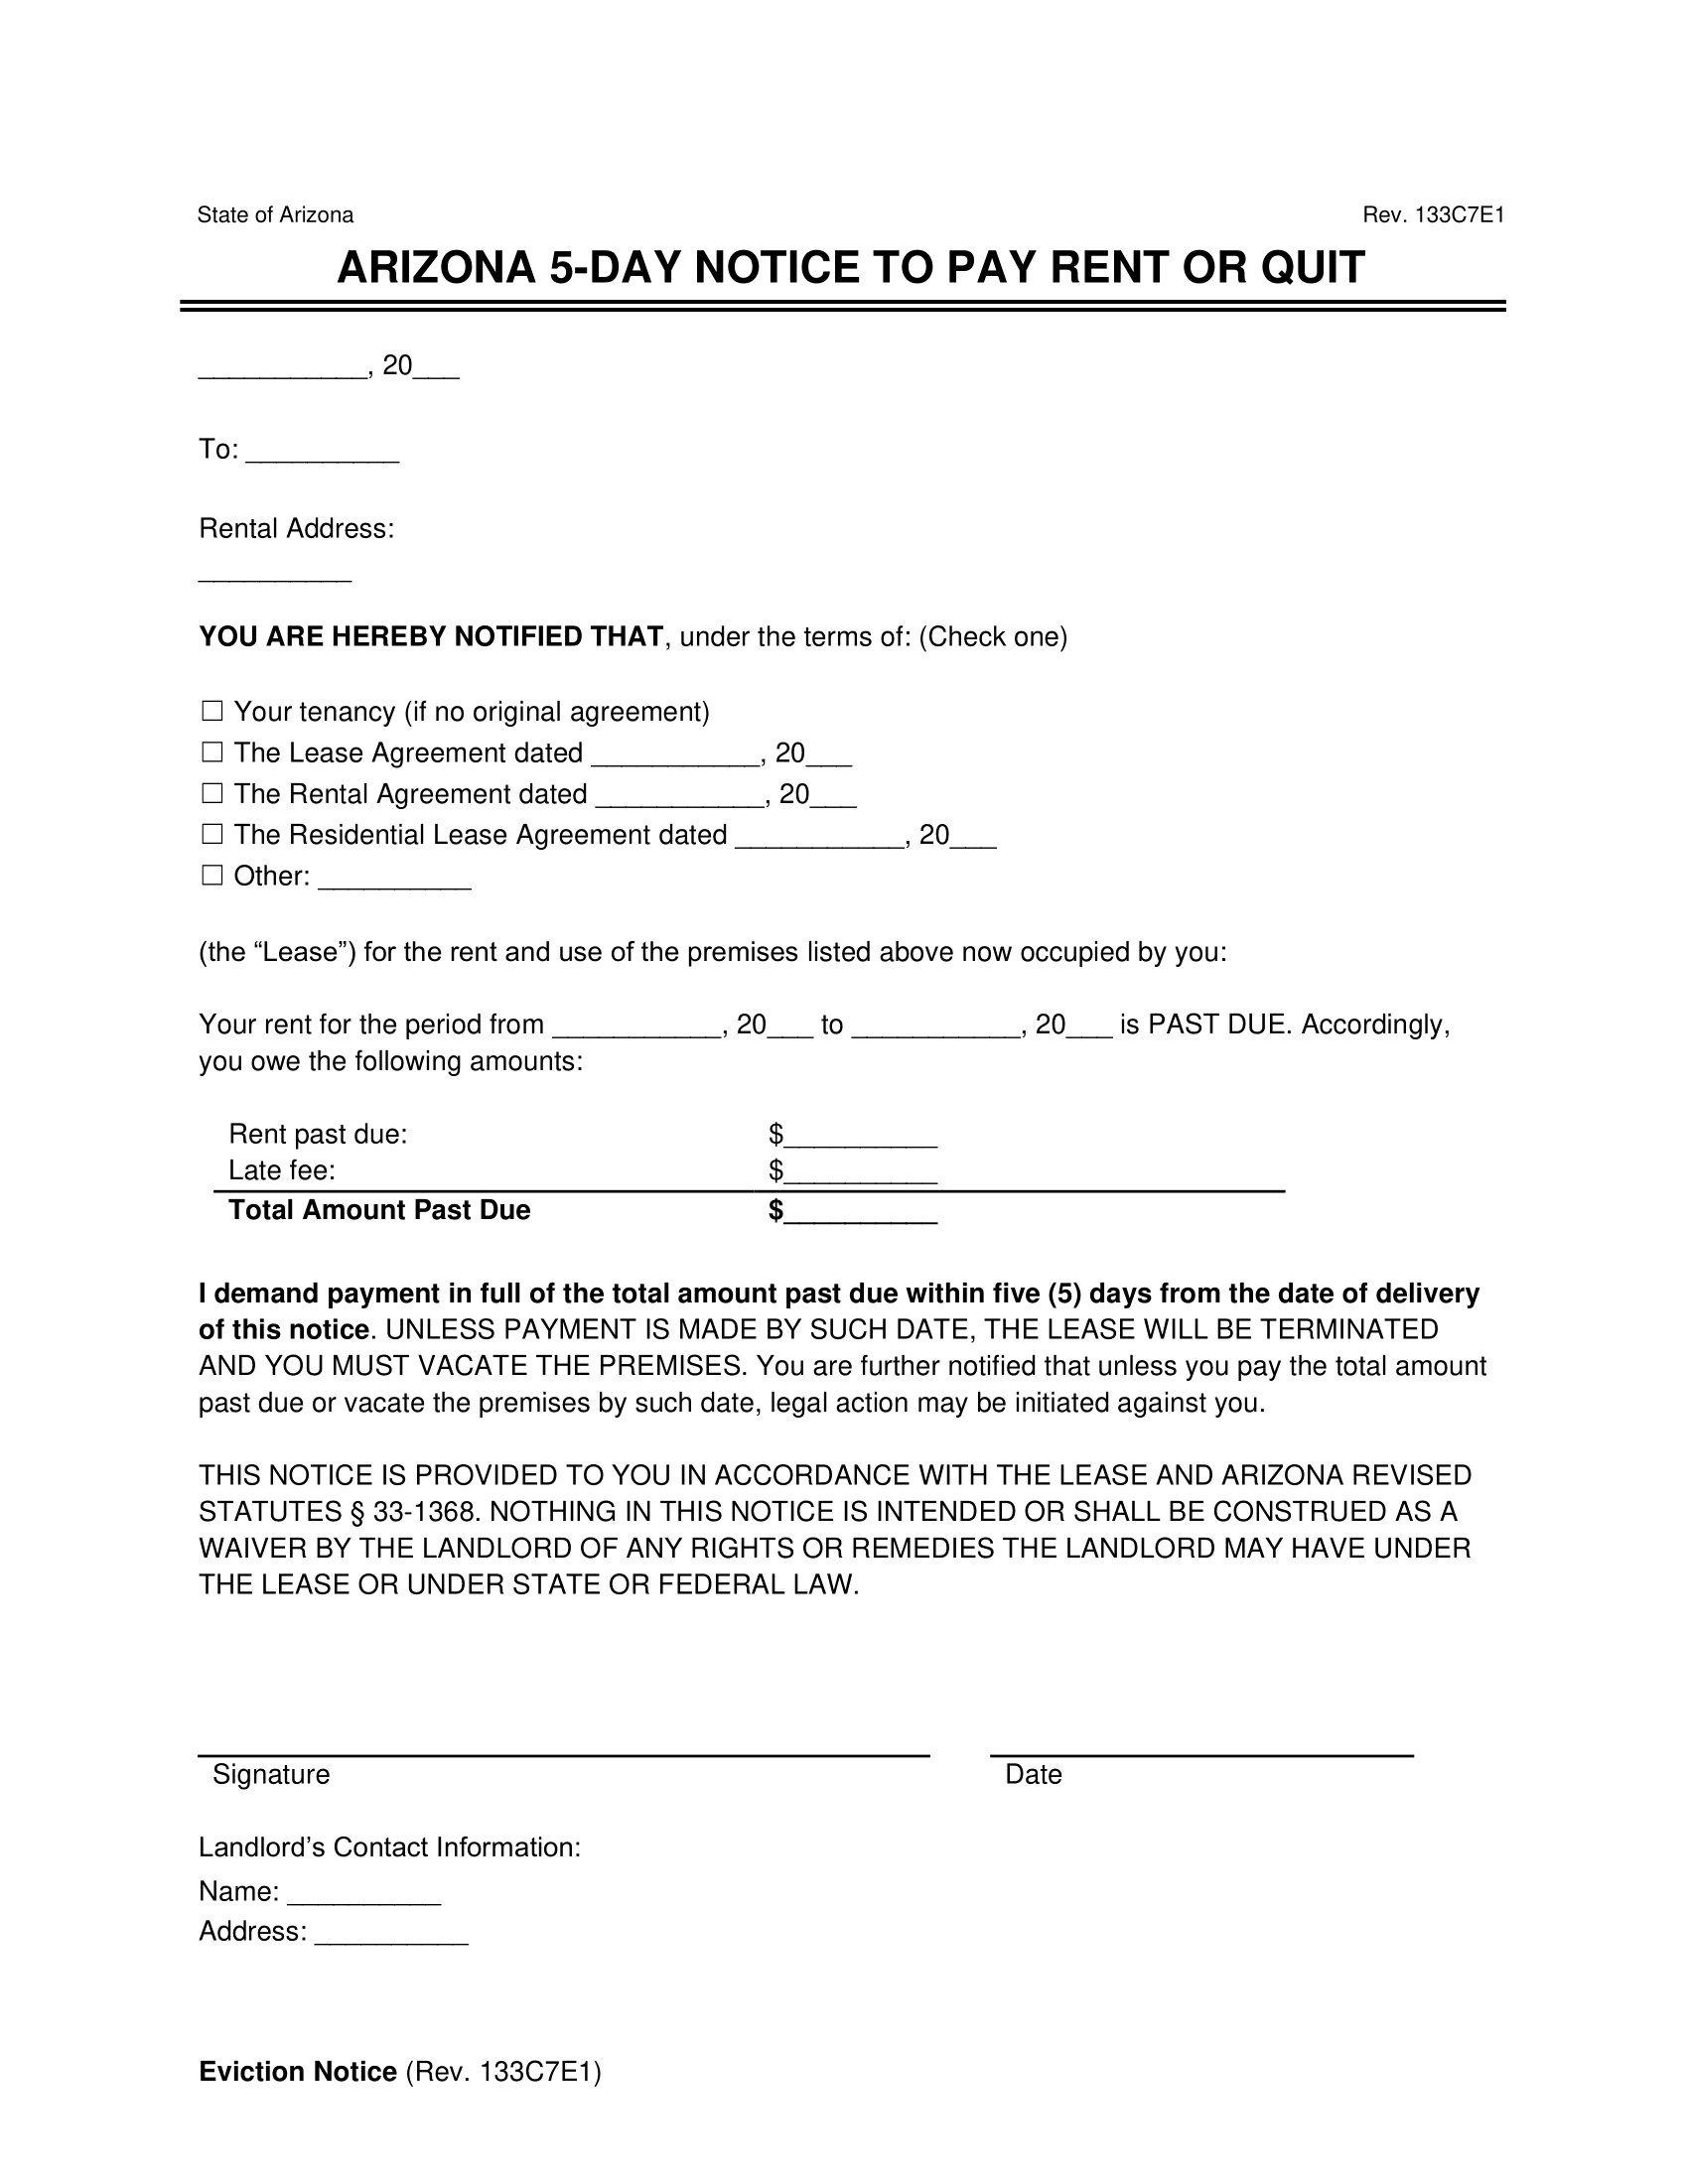 Arizona 5-Day Notice to Quit for Non-Payment of Rent